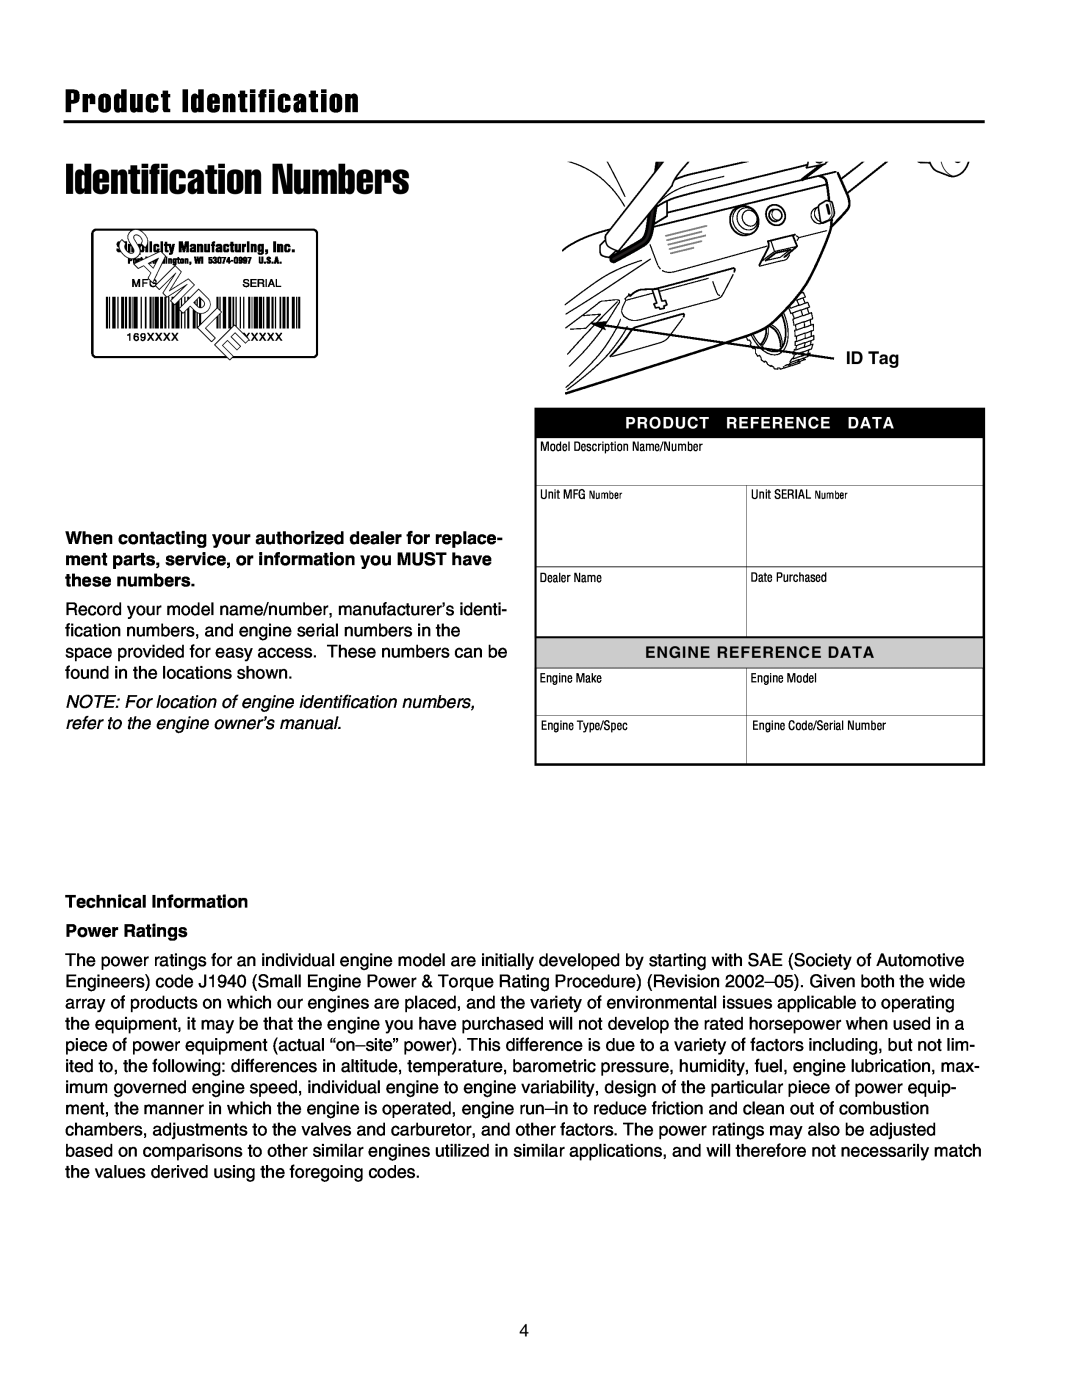 Snapper 5201m, 5201e manual Identification Numbers, Product Identification 